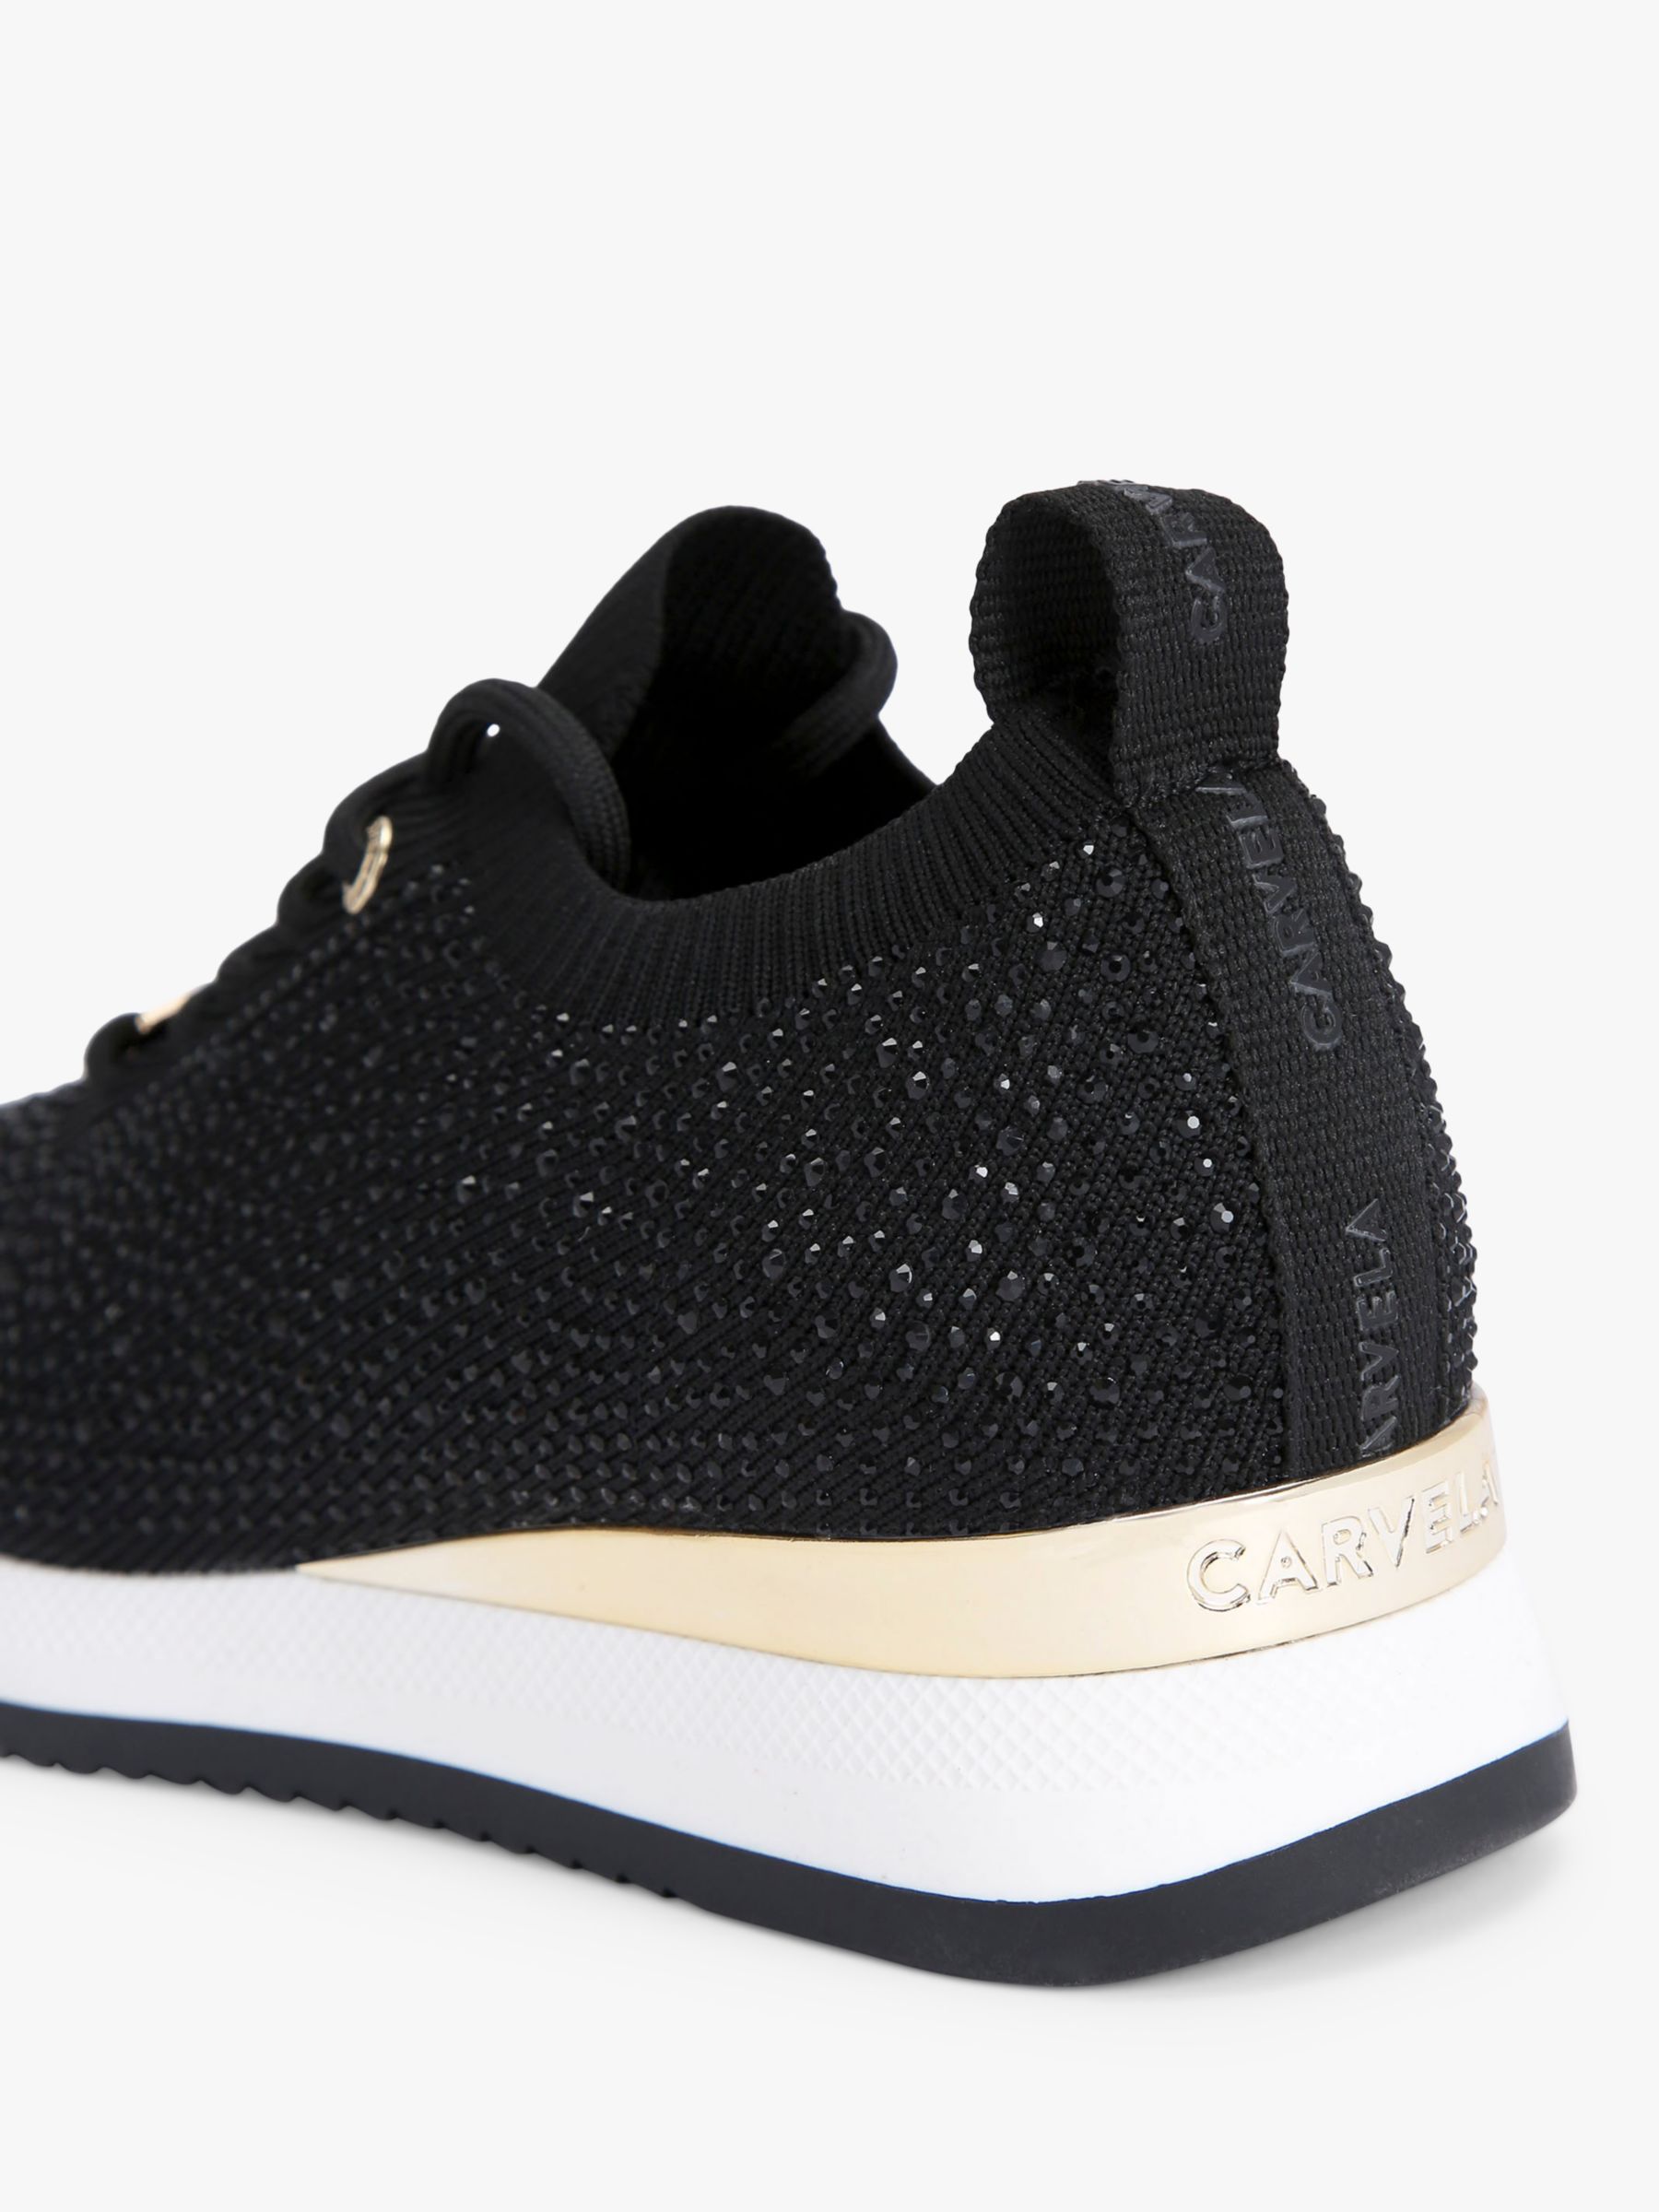 Buy Carvela Janeiro Jewel Lace Up Trainers Online at johnlewis.com